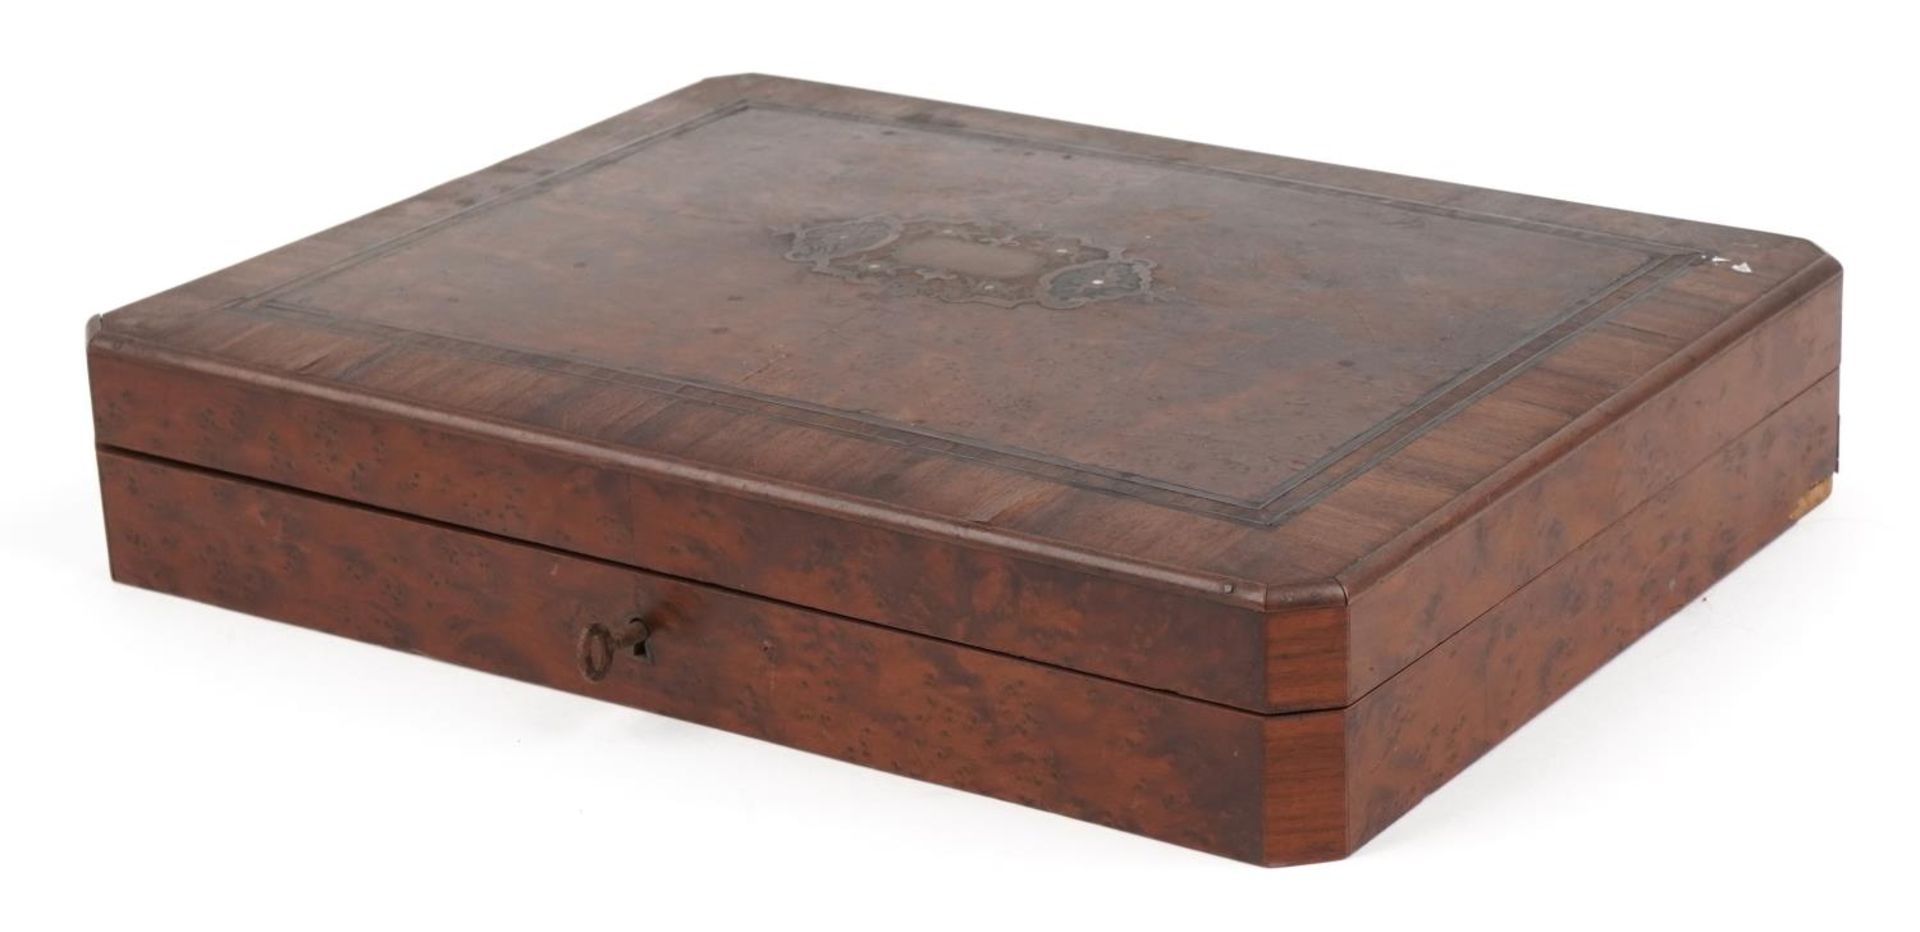 19th century French bird's eye maple and rosewood box with brass floral inlay and sectional